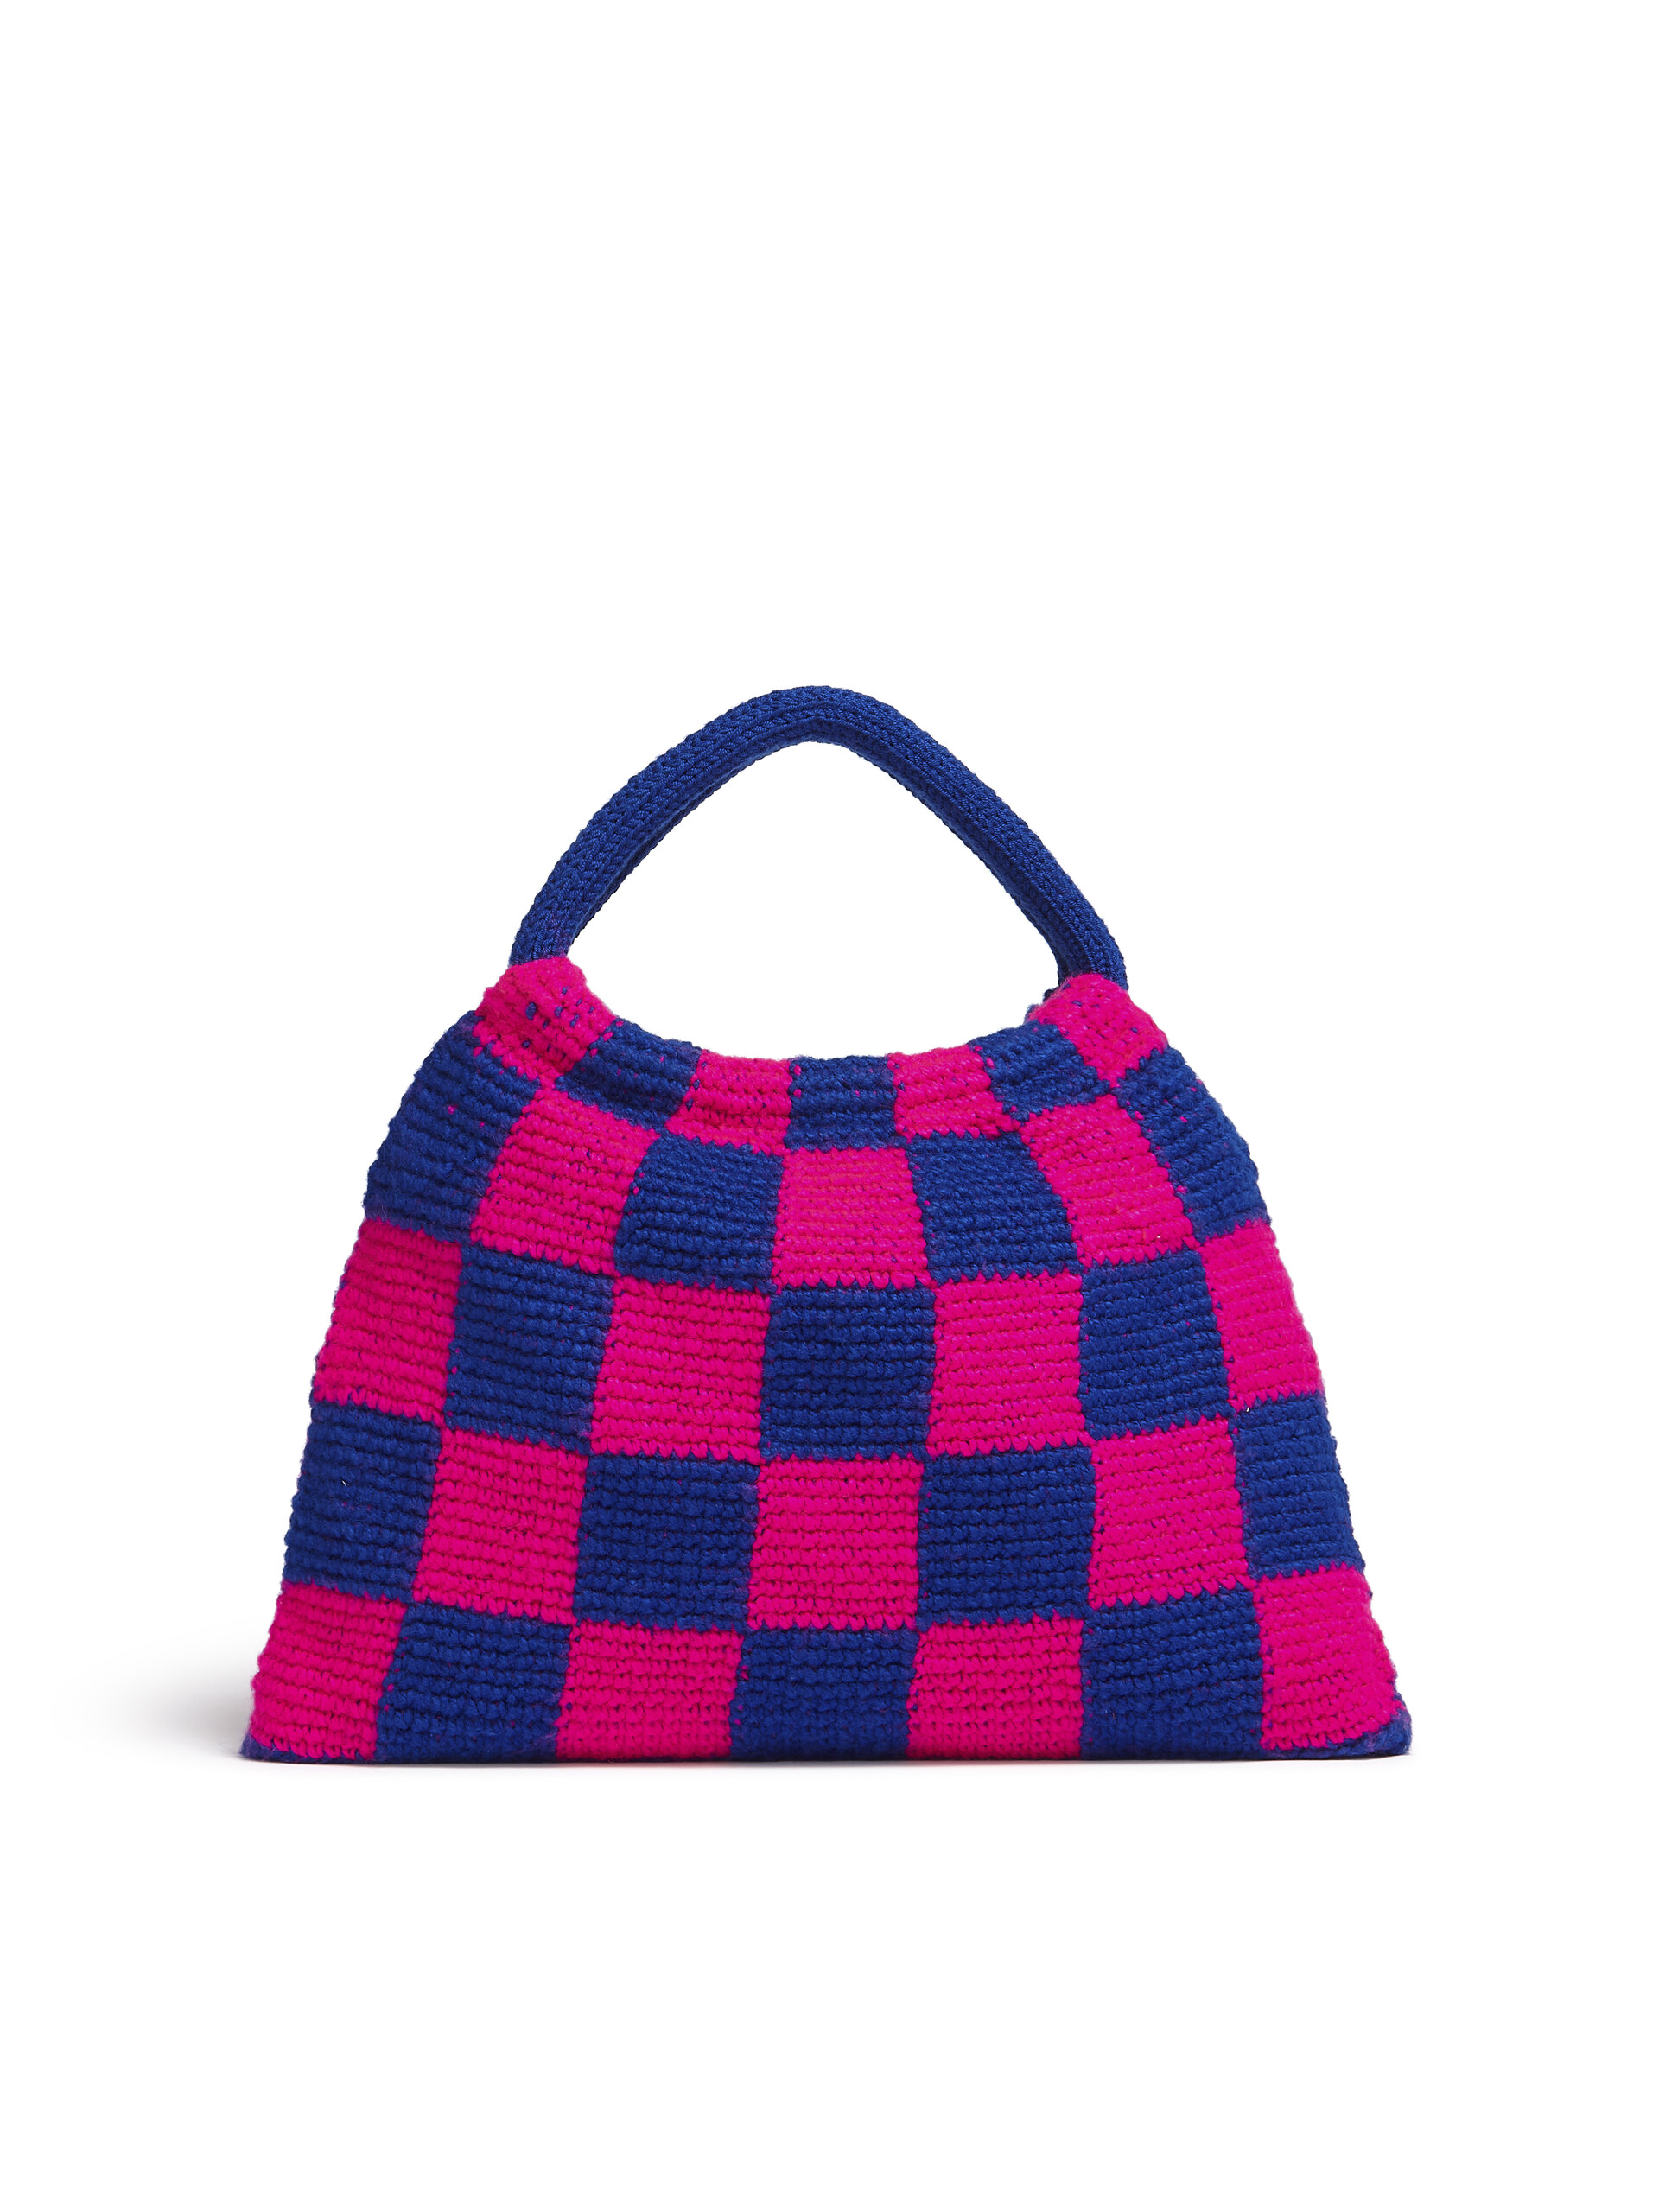 MARNI MARKET bag in pink and blue crochet - Bags - Image 3